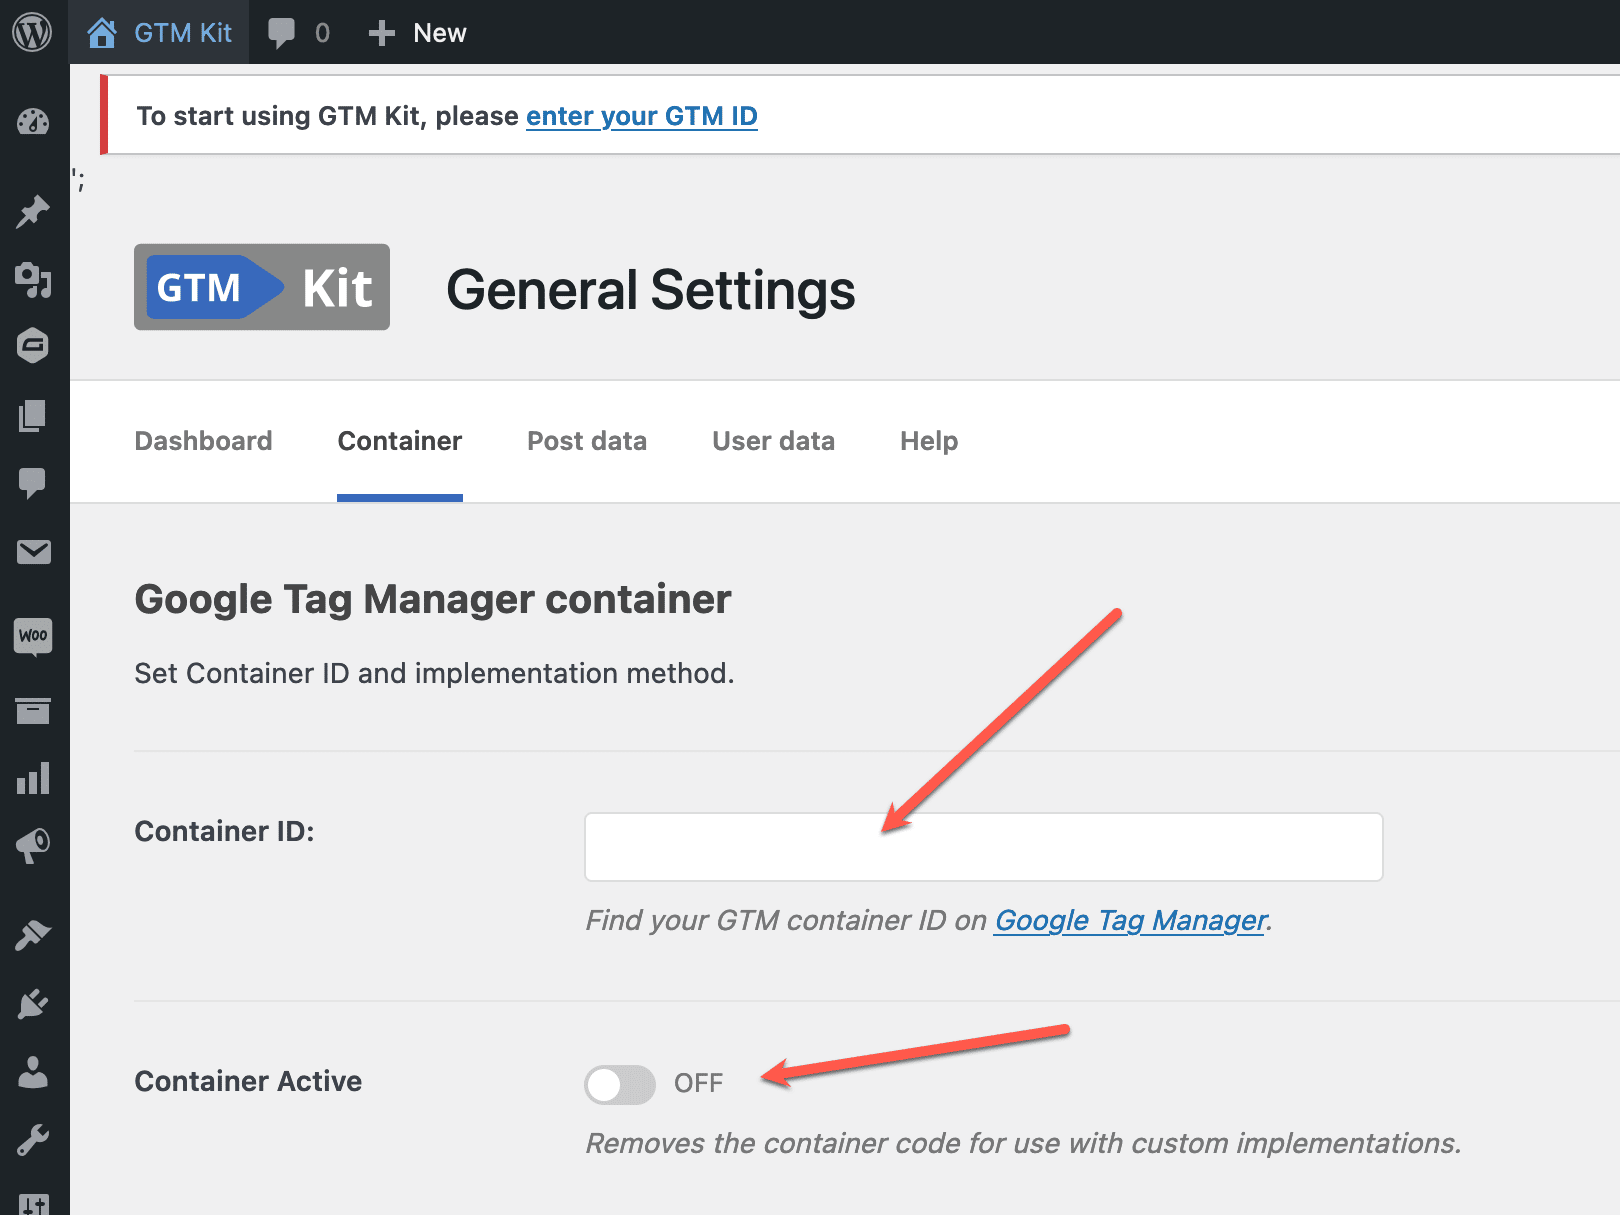 Google Tag Manager container